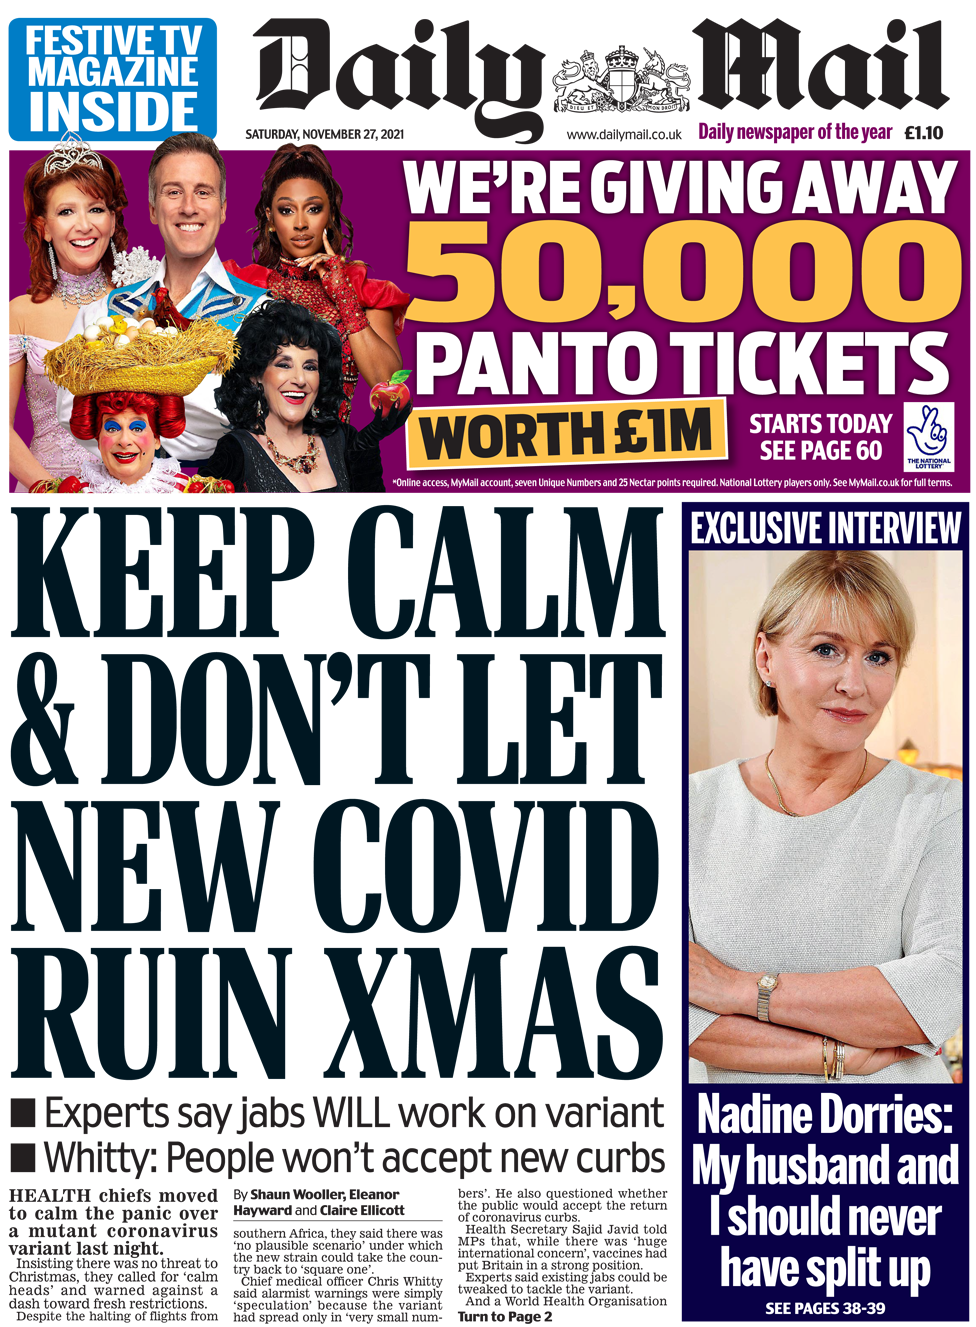 Front page of the Daily Mail